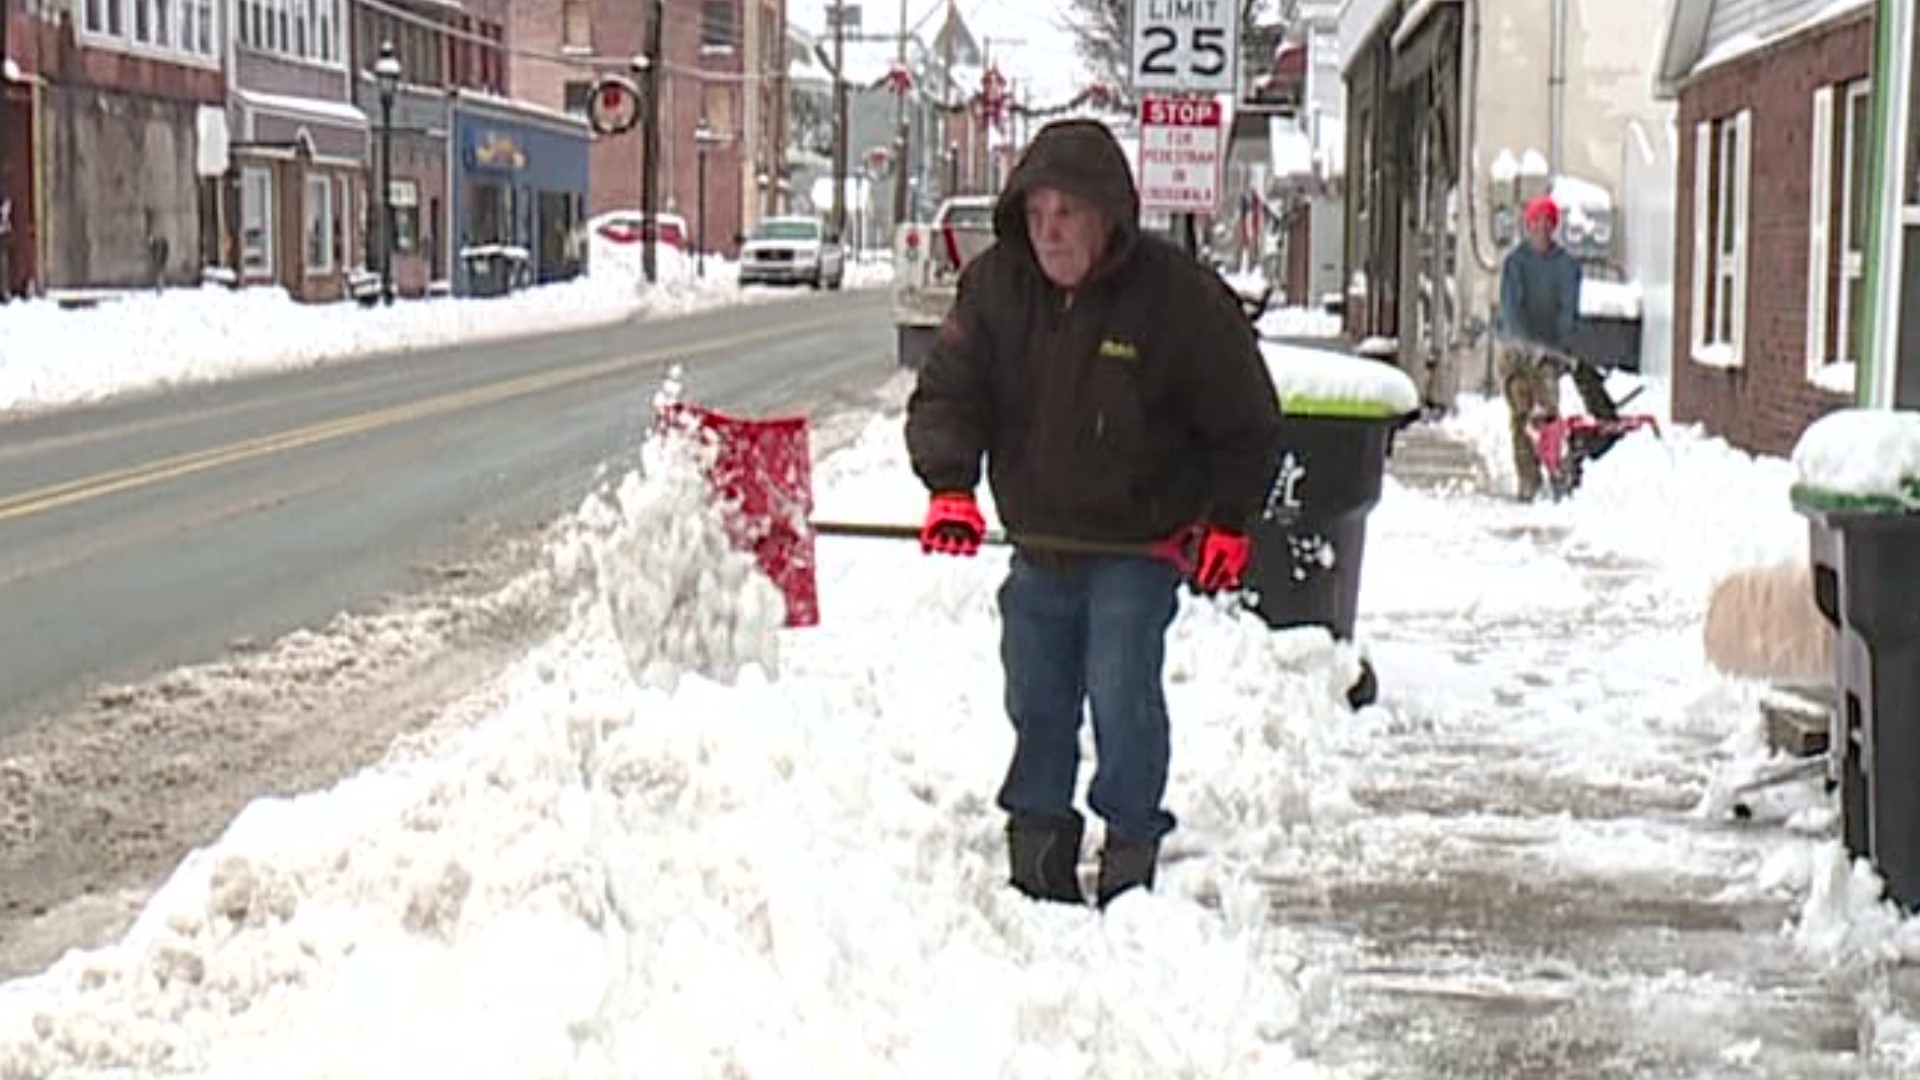 Newswatch 16's Courtney Harrison shows us how people spent the day digging out of the wet and heavy snow.